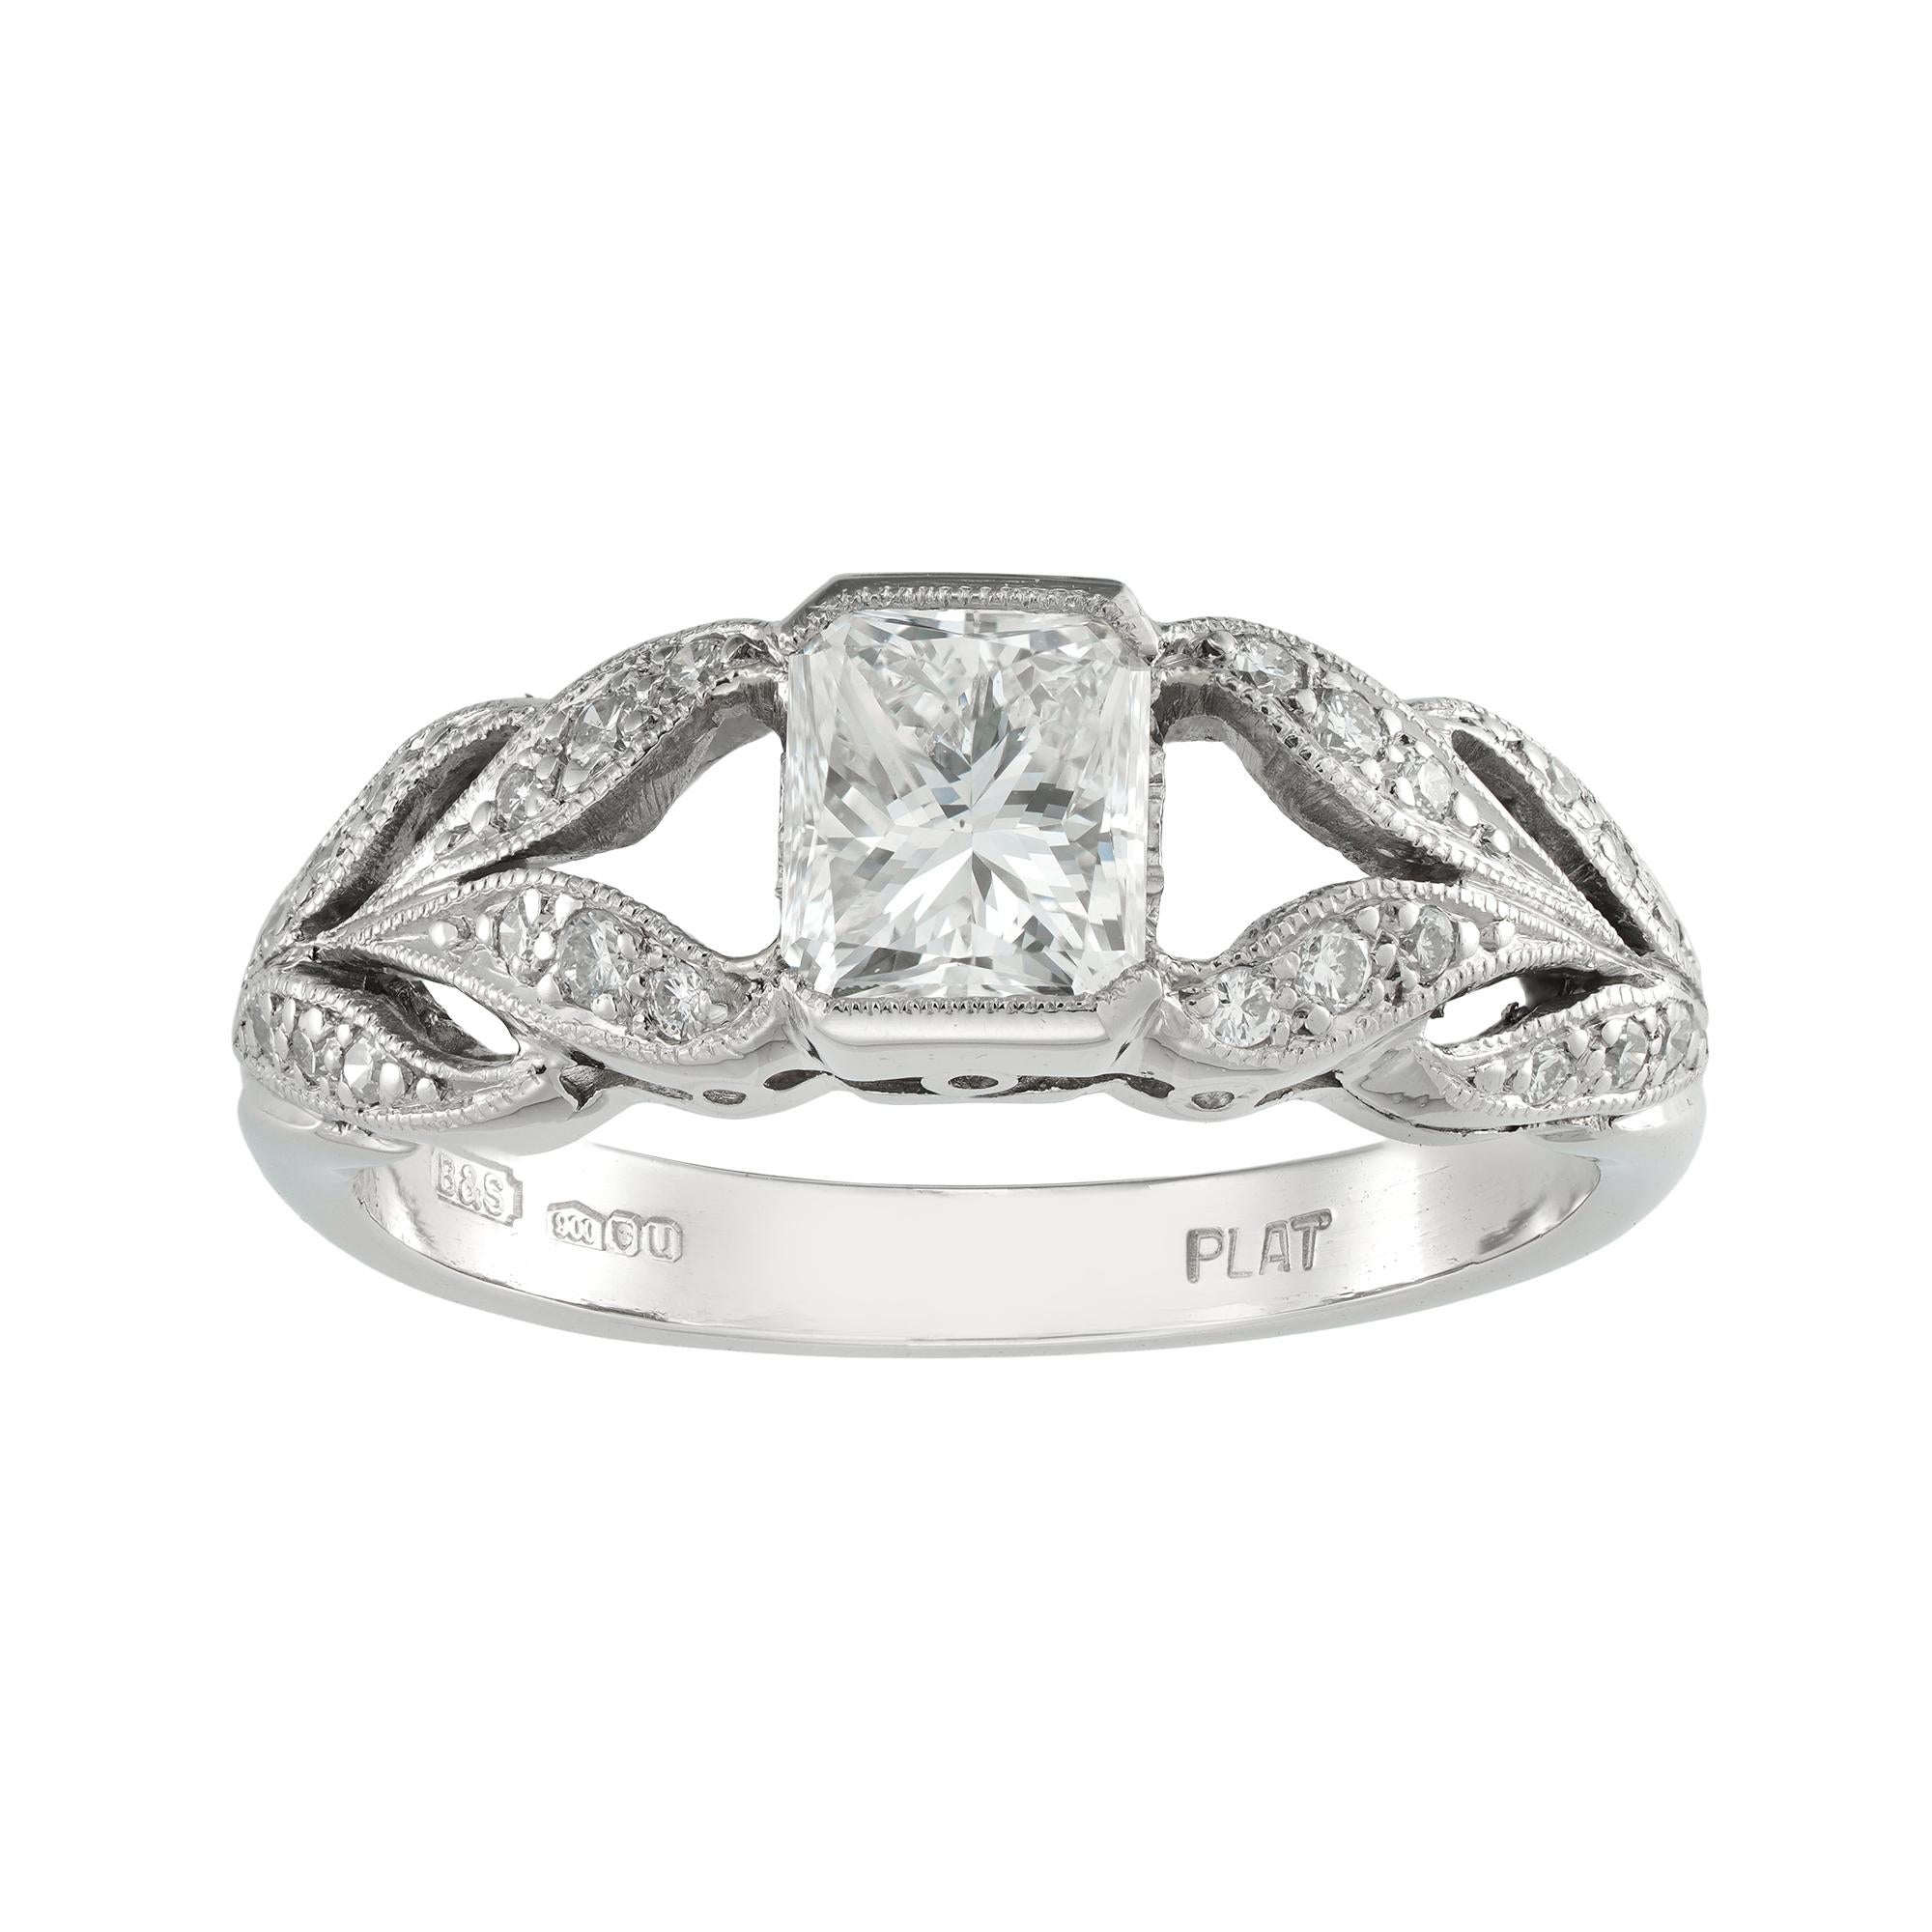 A diamond engagement ring, the radiant-cut diamond weighing 0.71 carats accompanied by De Beers report stating to be of G colour and VS2 clarity, half rub-over set between laurel-leaf designed shoulders millegrain-set with small round brilliant-cut